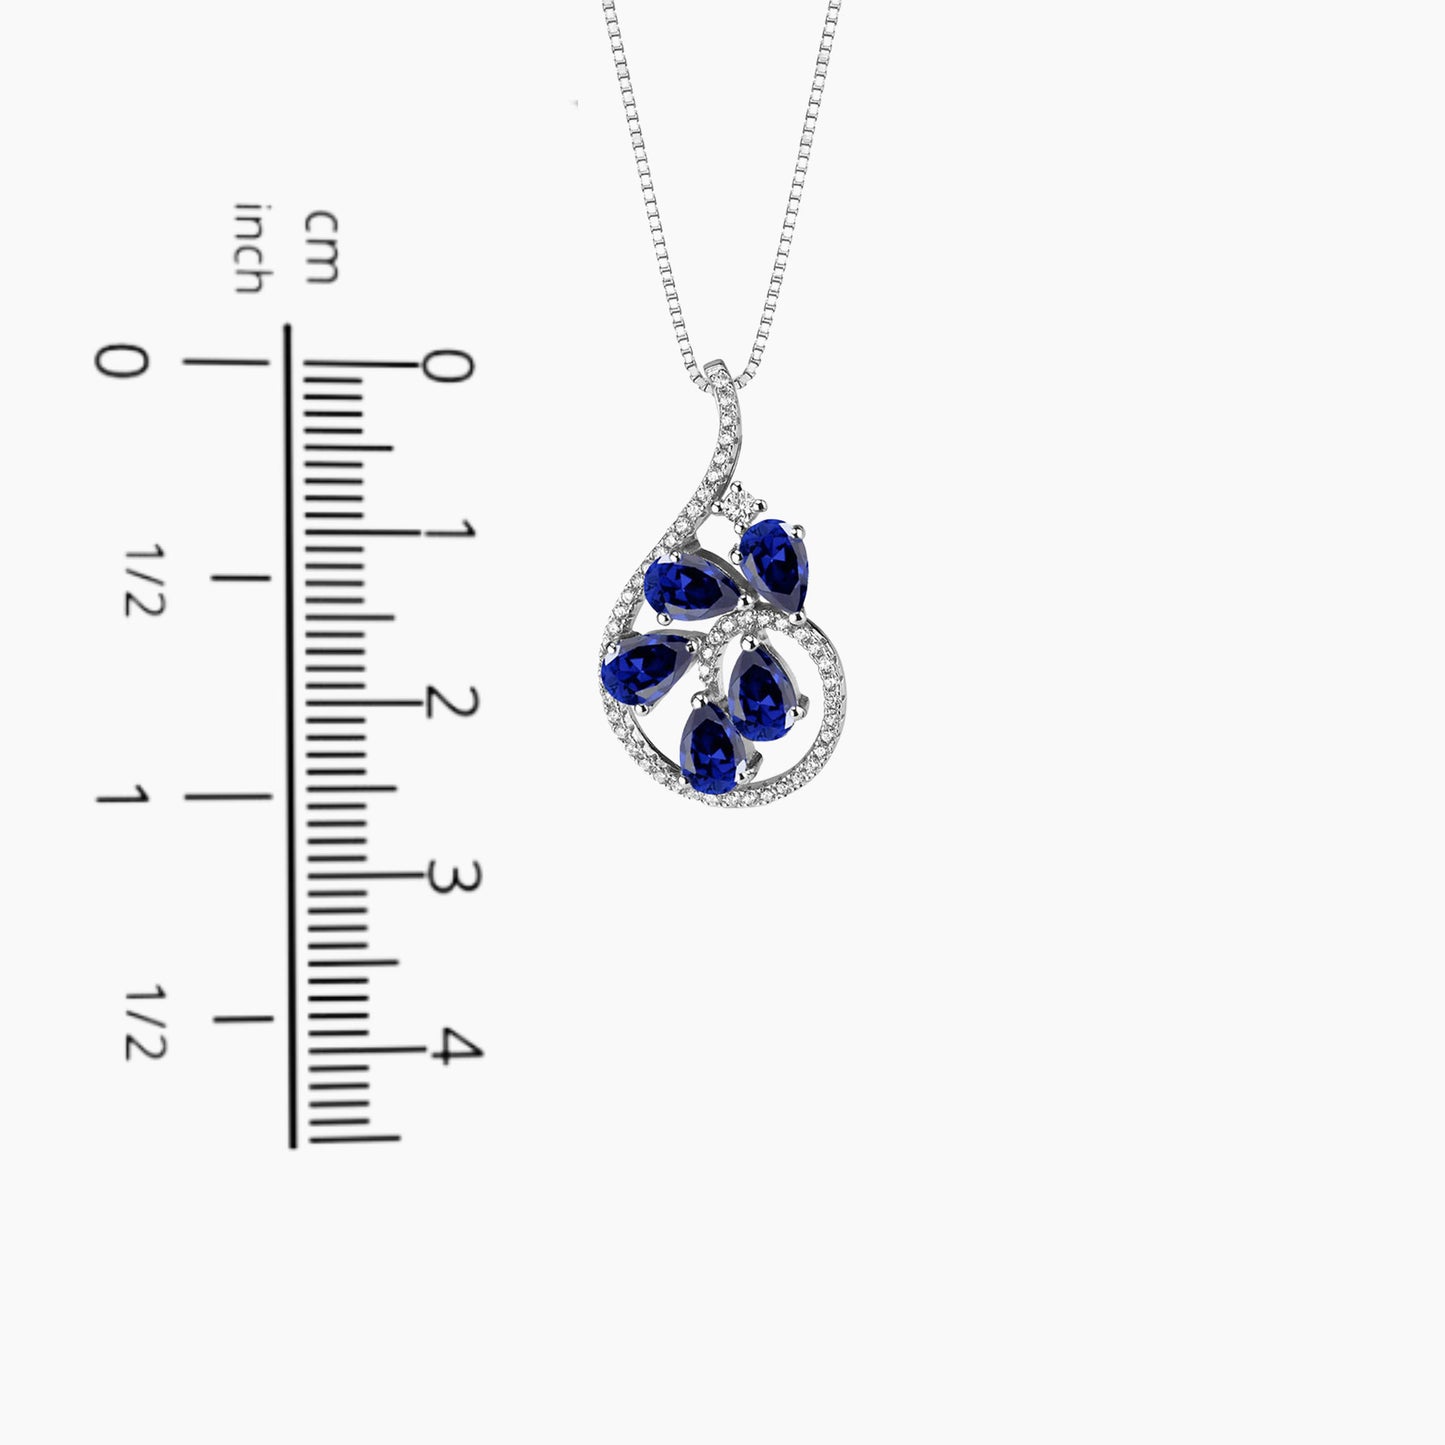 Sapphire Dewdrop Necklace in Sterling Silver